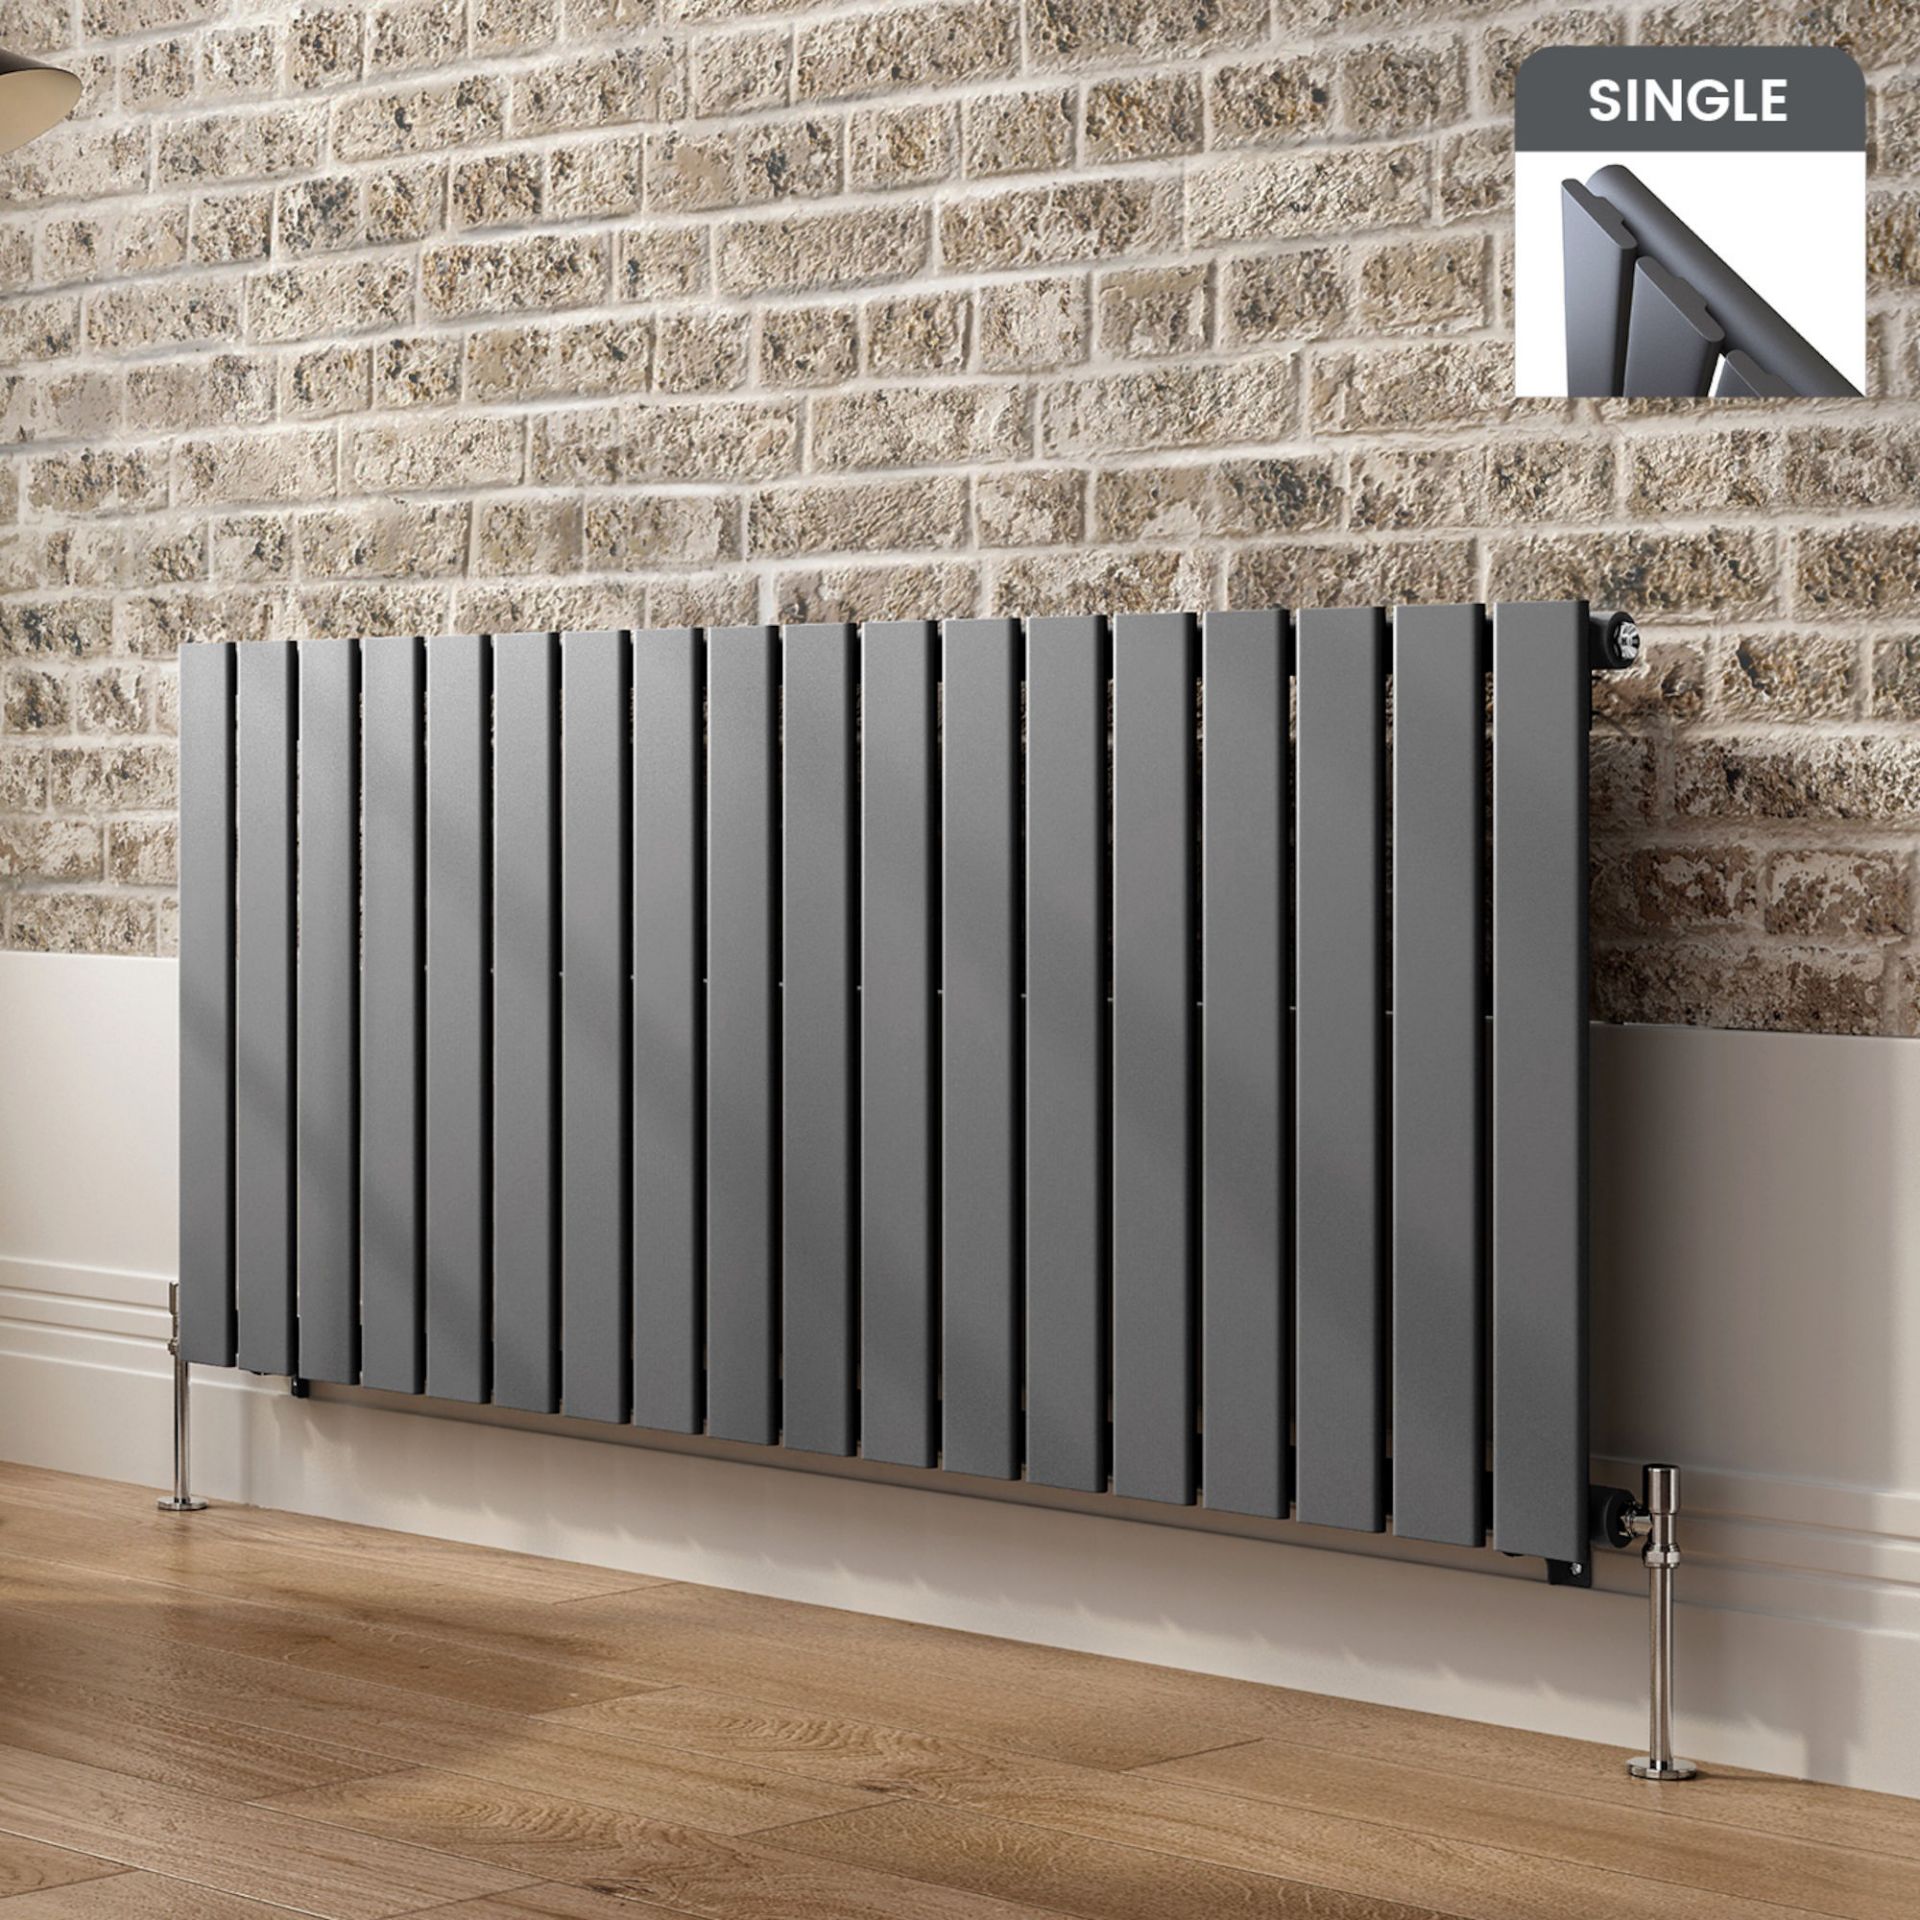 (OS59) 600x1380mm Anthracite Single Flat Panel Horizontal Radiator. RRP £289.99. Made from high